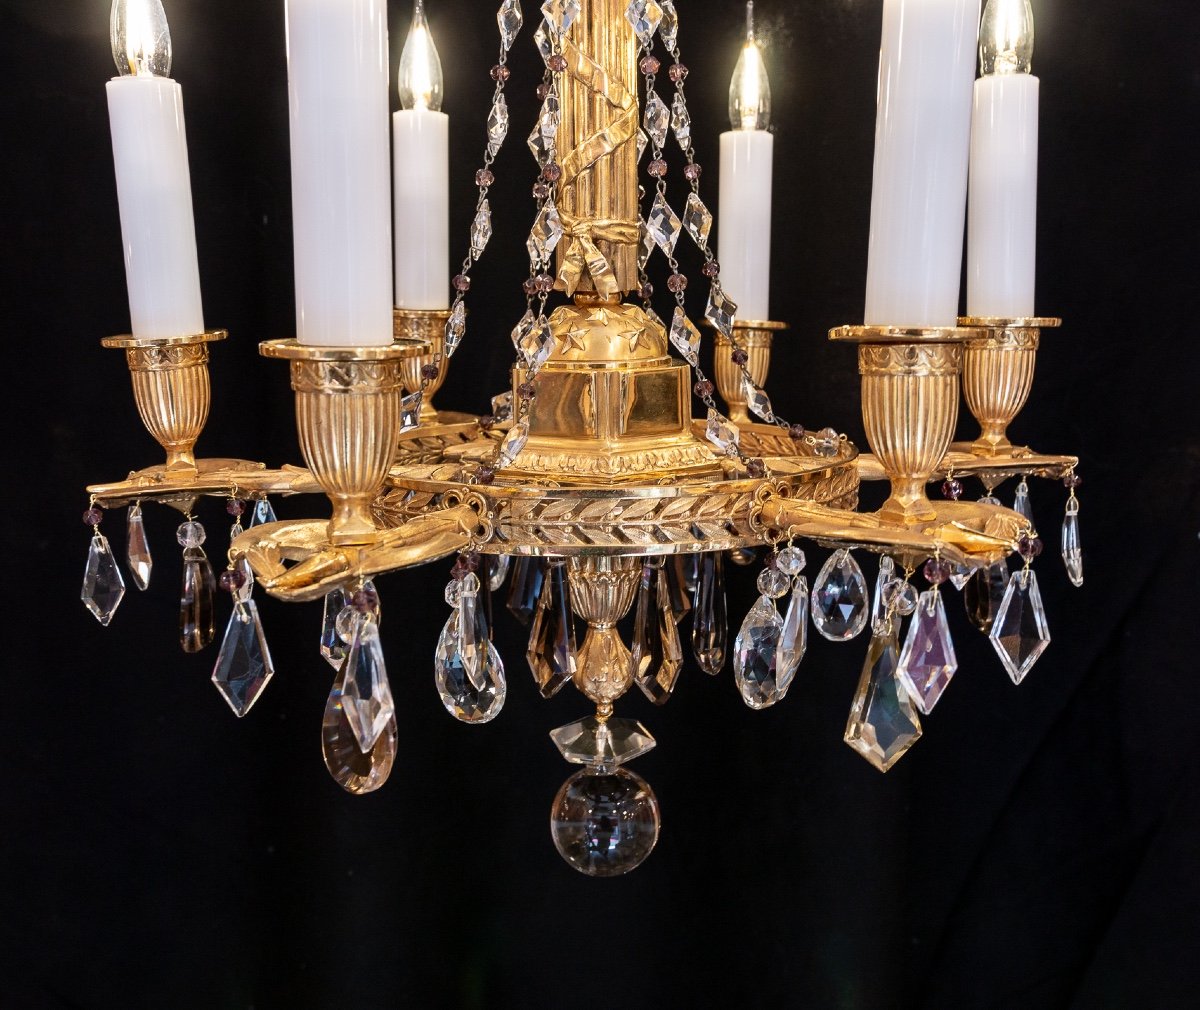 Revolutionary-style Chandelier In Chiseled And Gilded Bronze, 19th Century.-photo-2